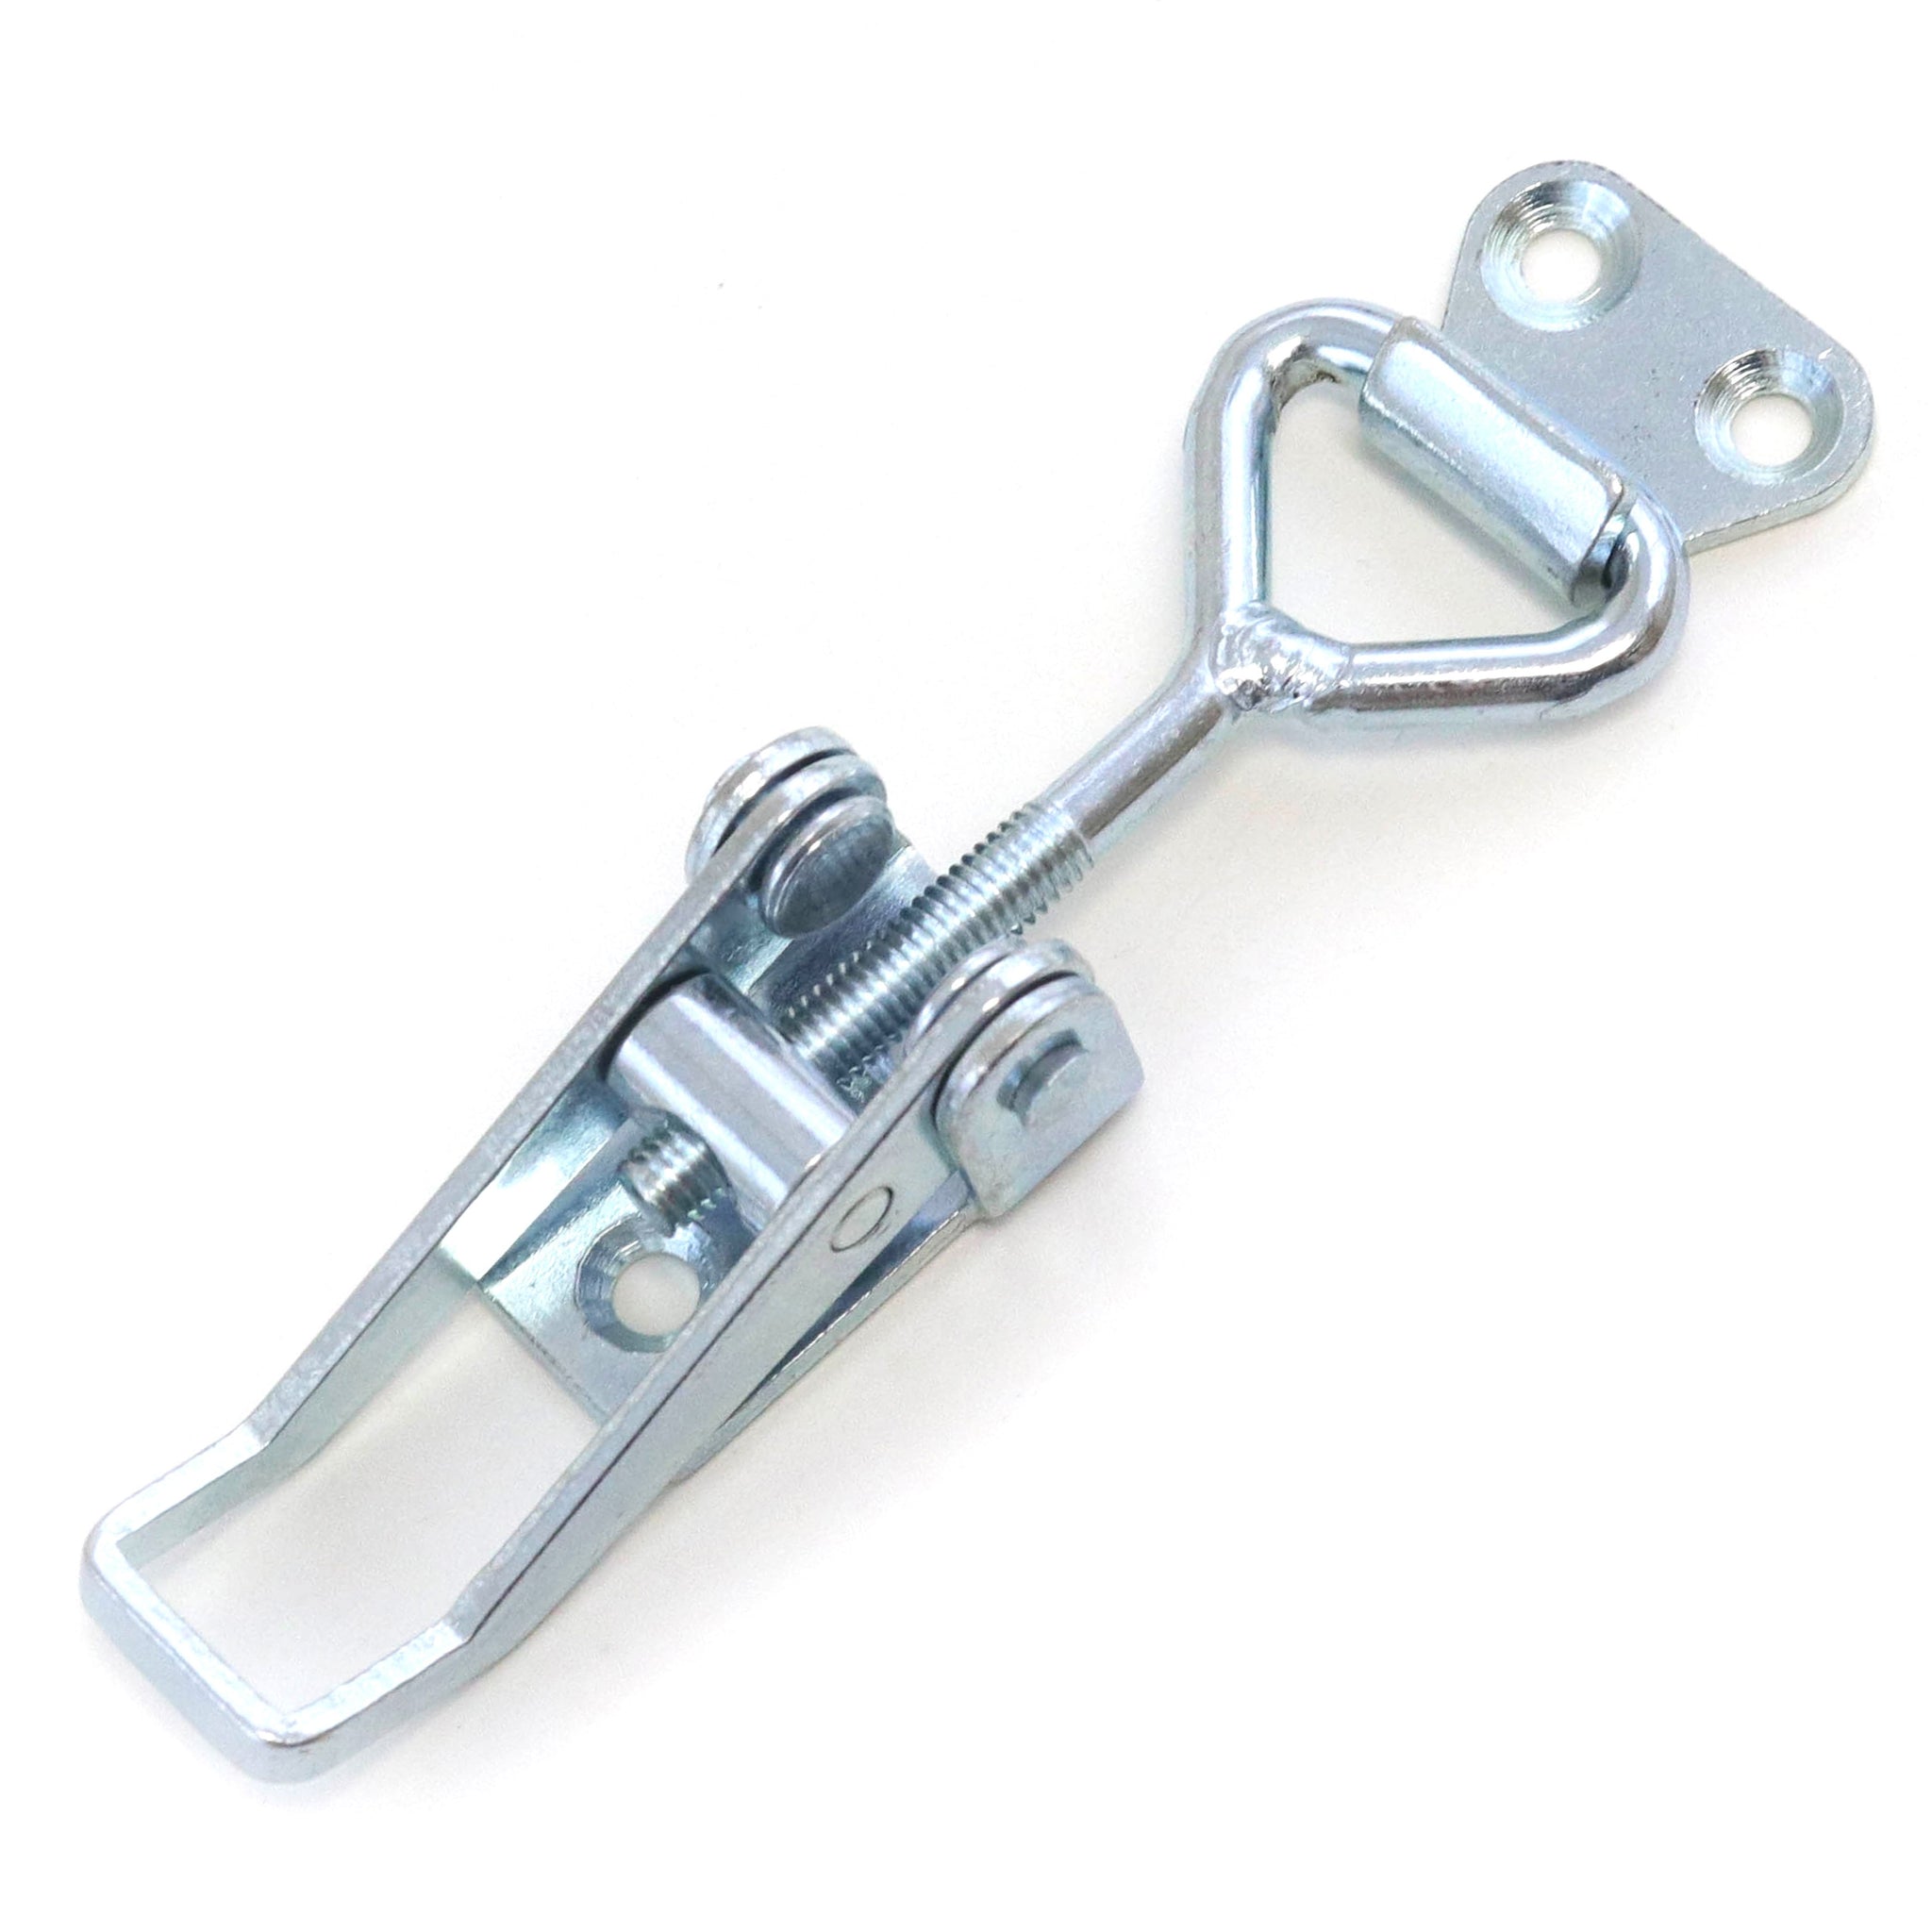 Red Hound Auto Pull Latch Toggle Clamp Adjustable Coated Steel for Cabinets Doors Storage Boxes and More 2-1/8" 54 mm